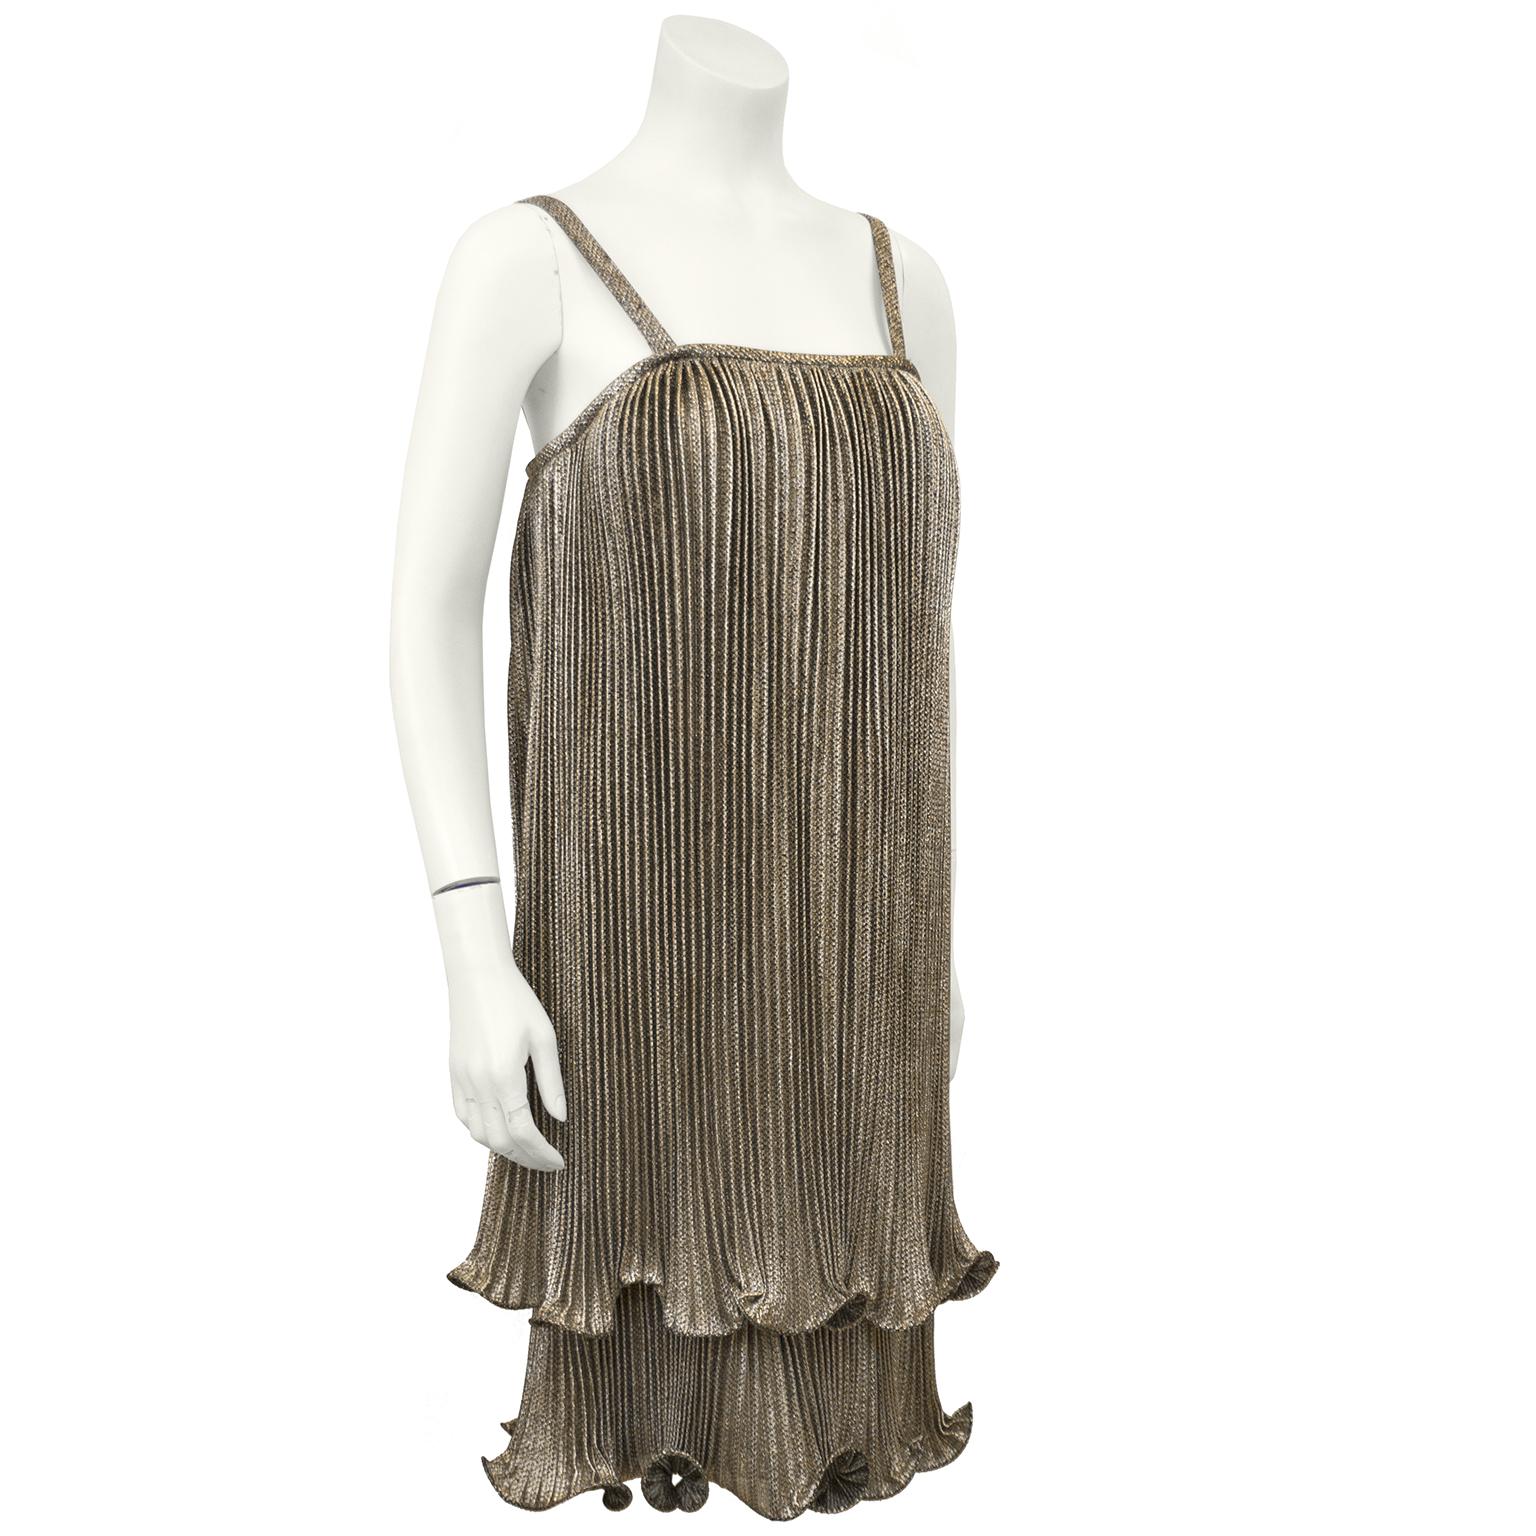 1970s American made gold and black accordion style cocktail dress  from the 